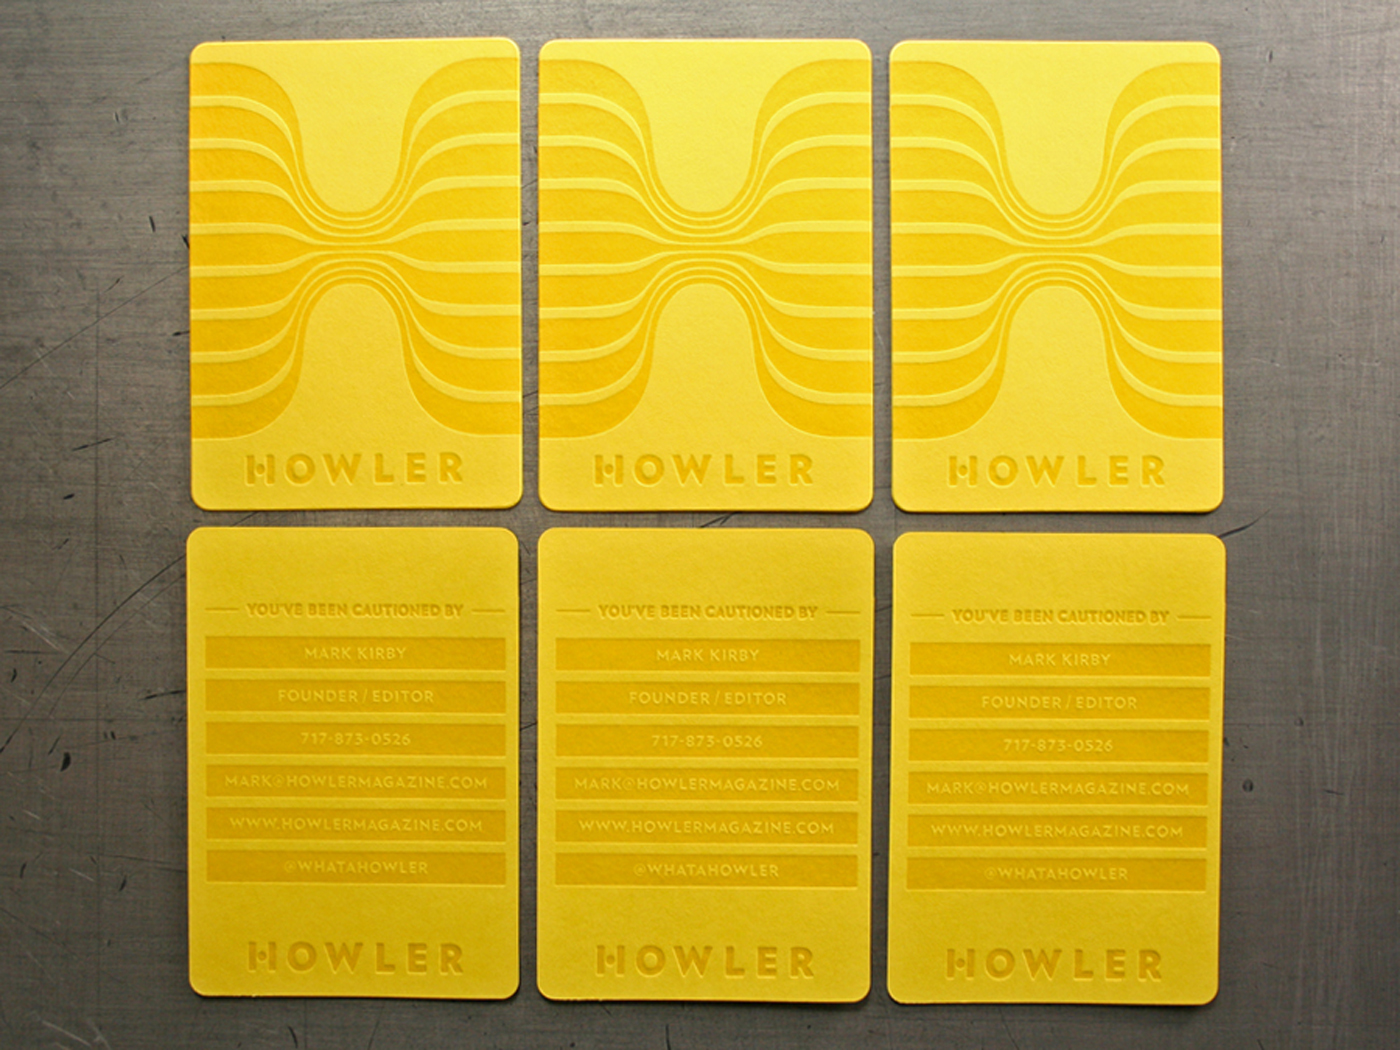 whatahowler soccer football howler letterpress Business Cards Printing Red Card yellow card 8by8mag